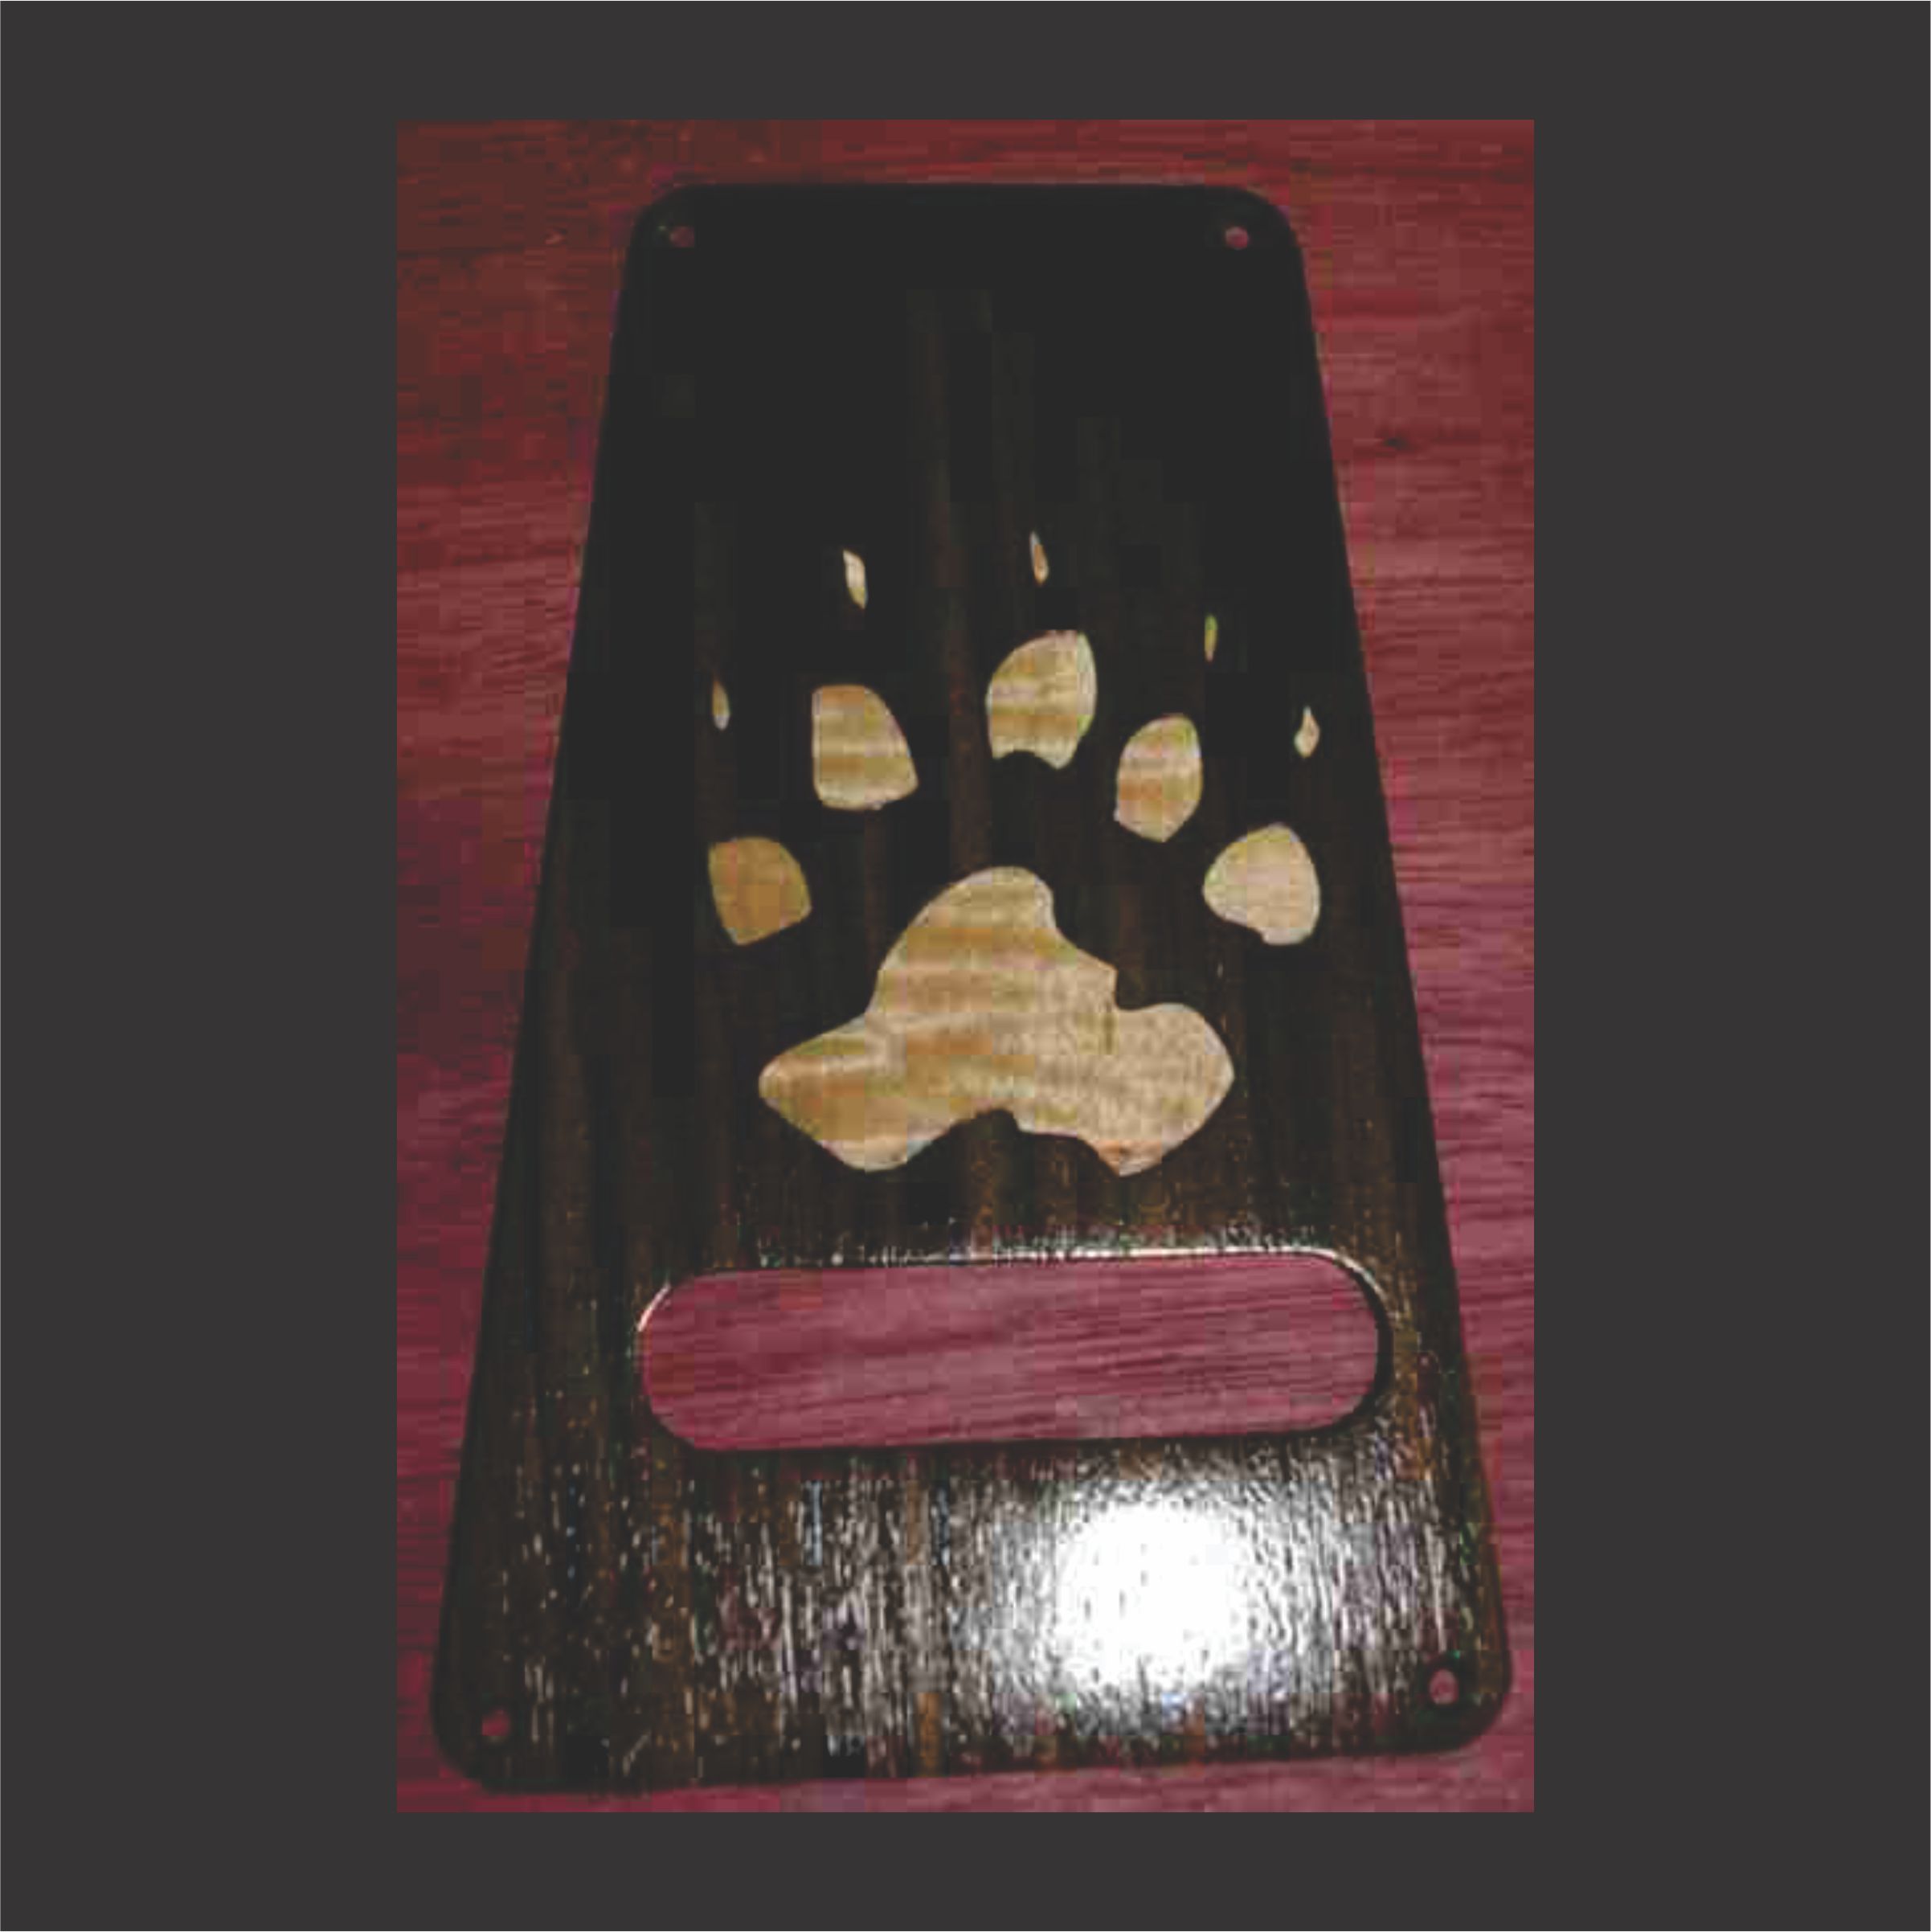 Flame Maple Bear Paw Graphic Inlayed Into Electronics Cover